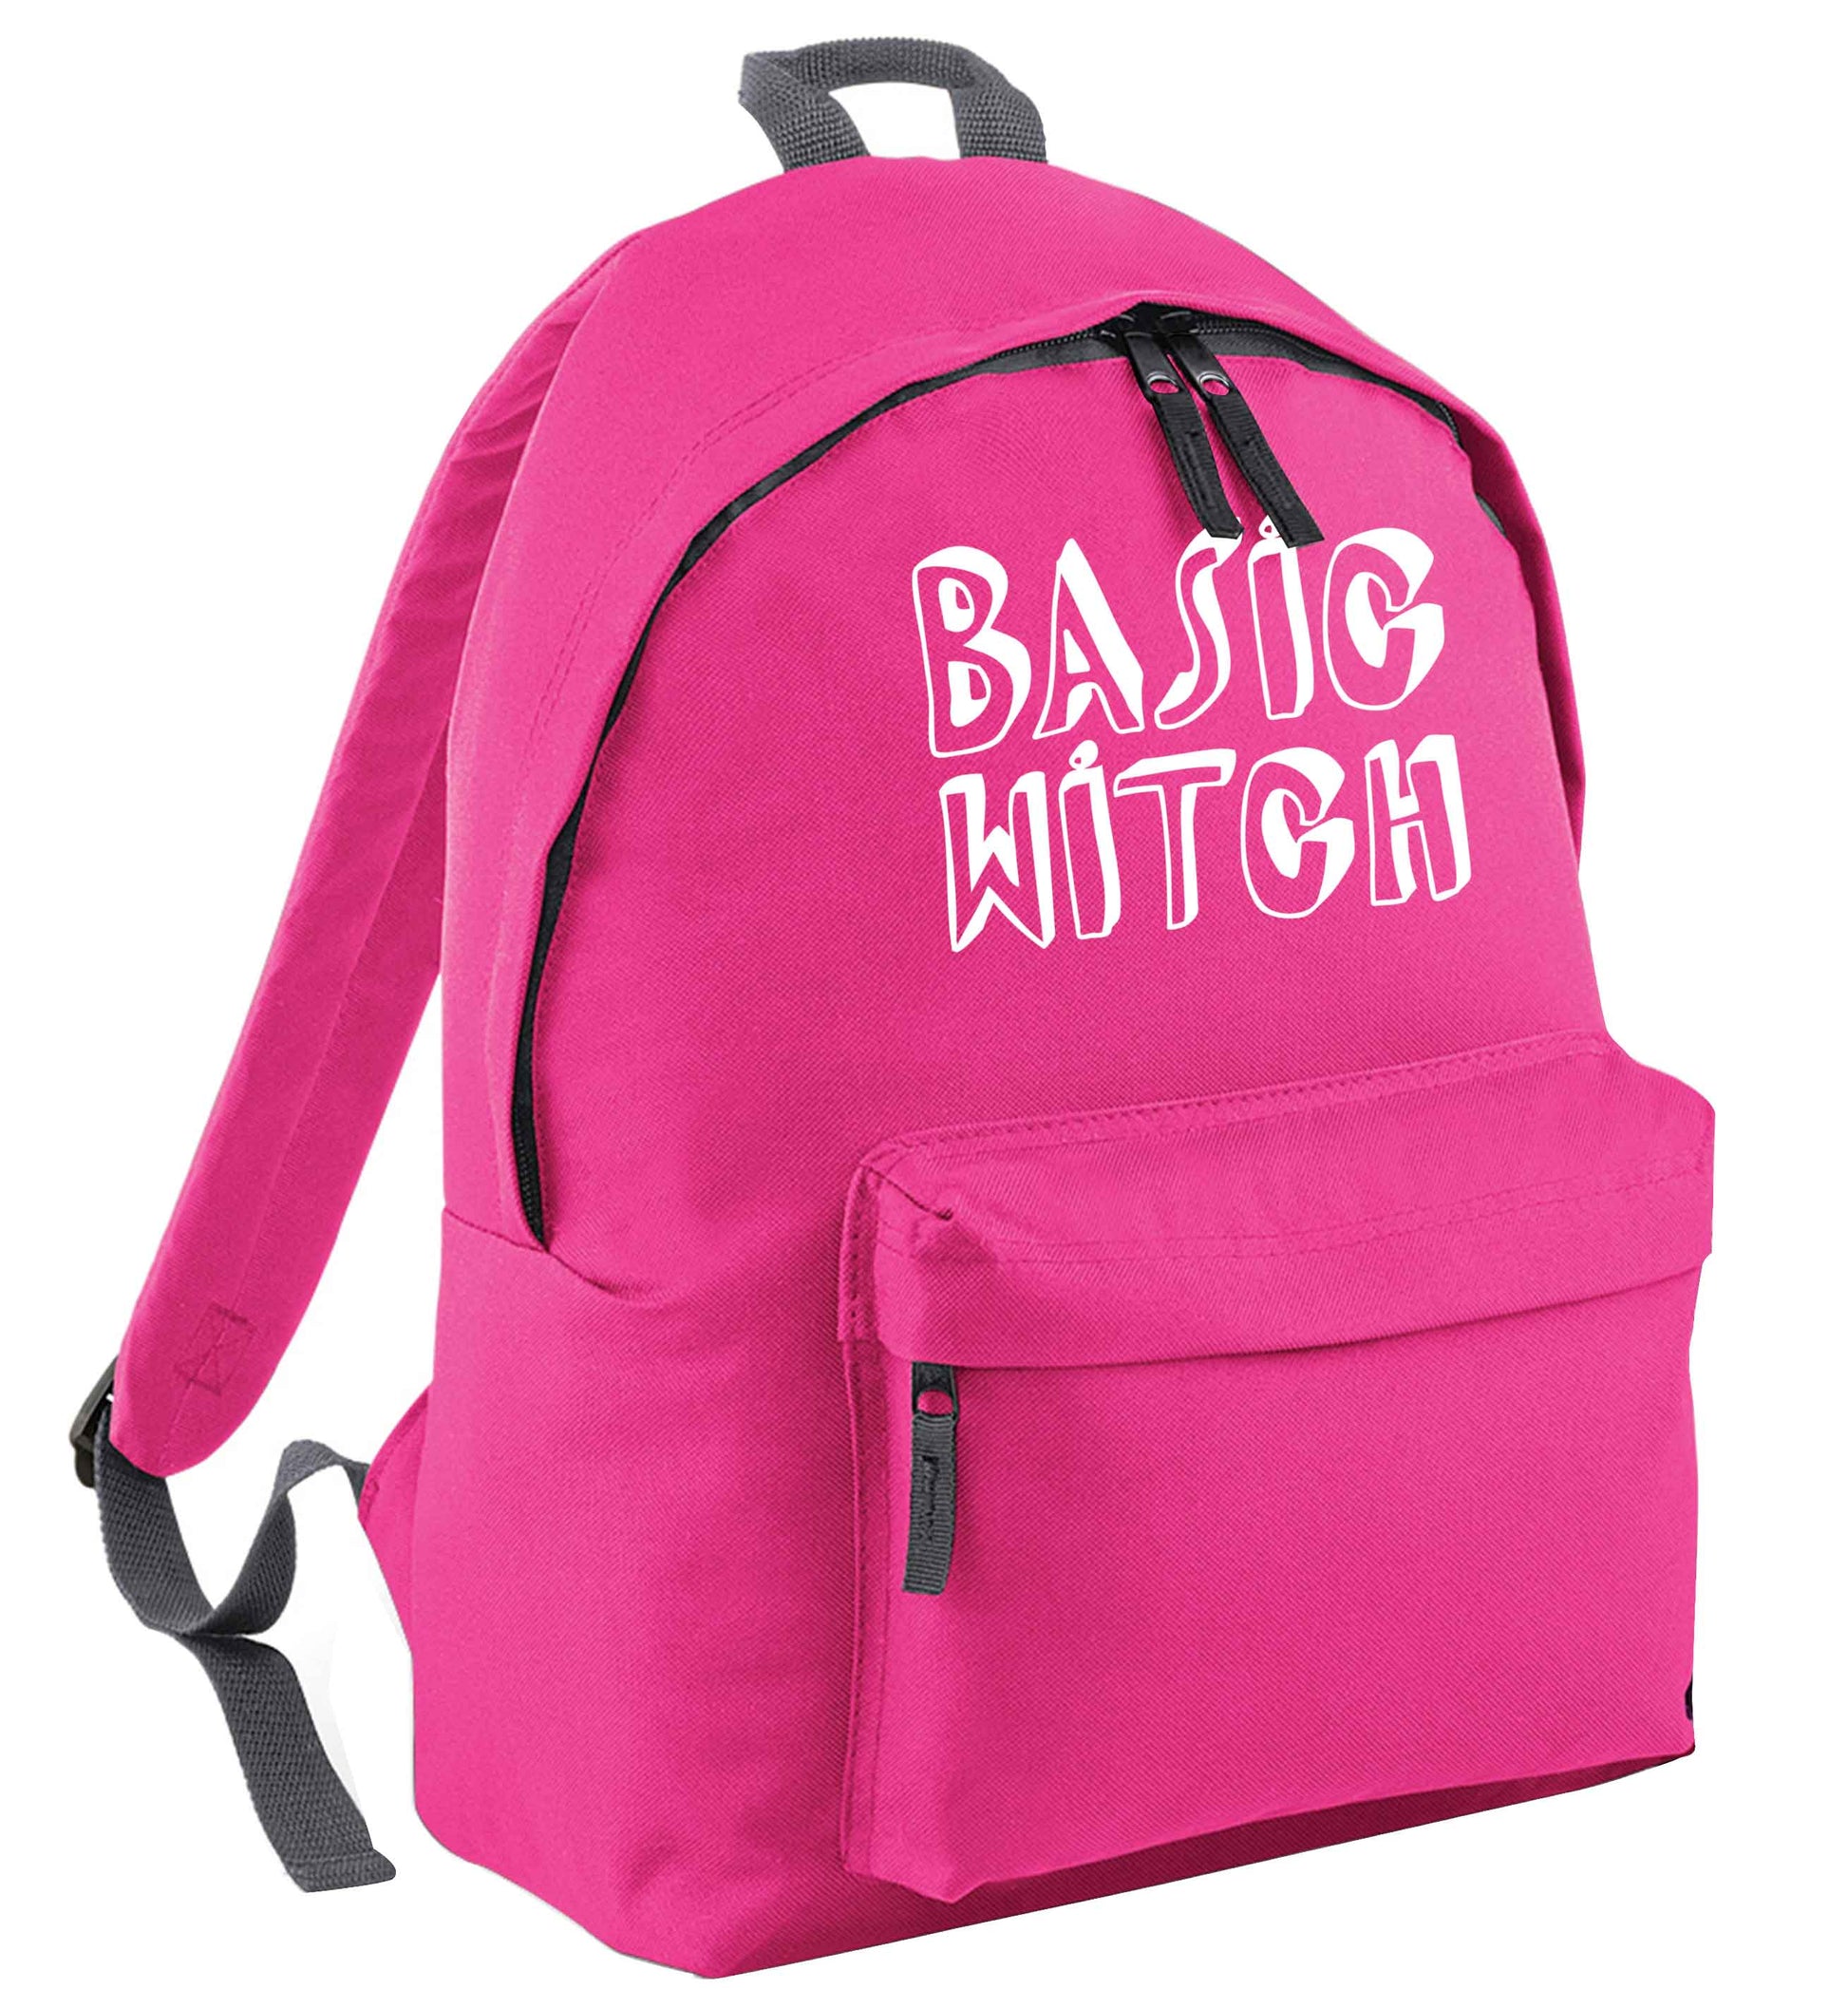 Basic witch | Children's backpack